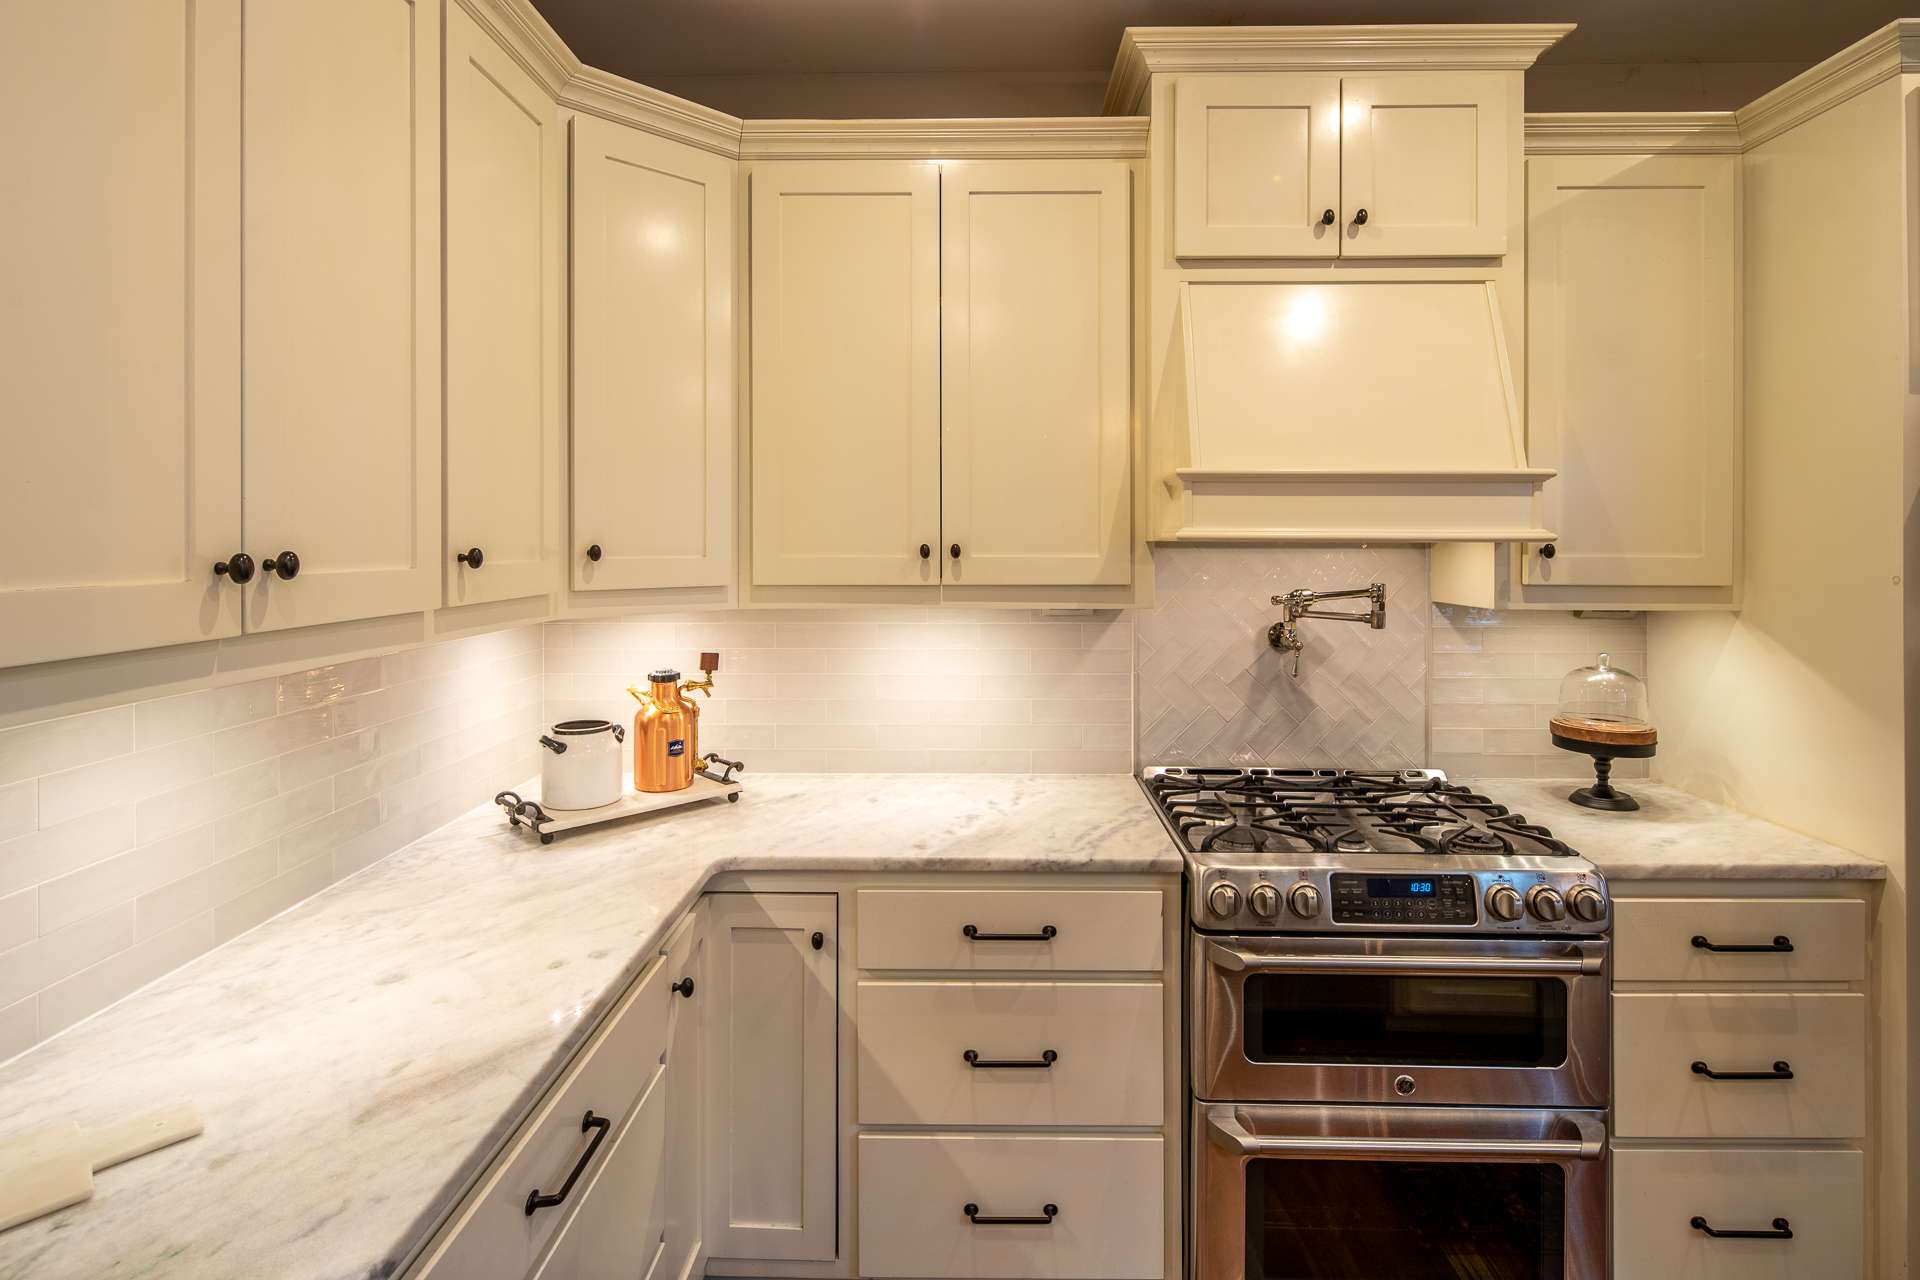 Enjoy custom white cabinetry designed to hide all your small appliances, granite counter tops, stainless appliances including gas range with dual fuel double oven and pot filler and Legrand under cabinet lighting system.